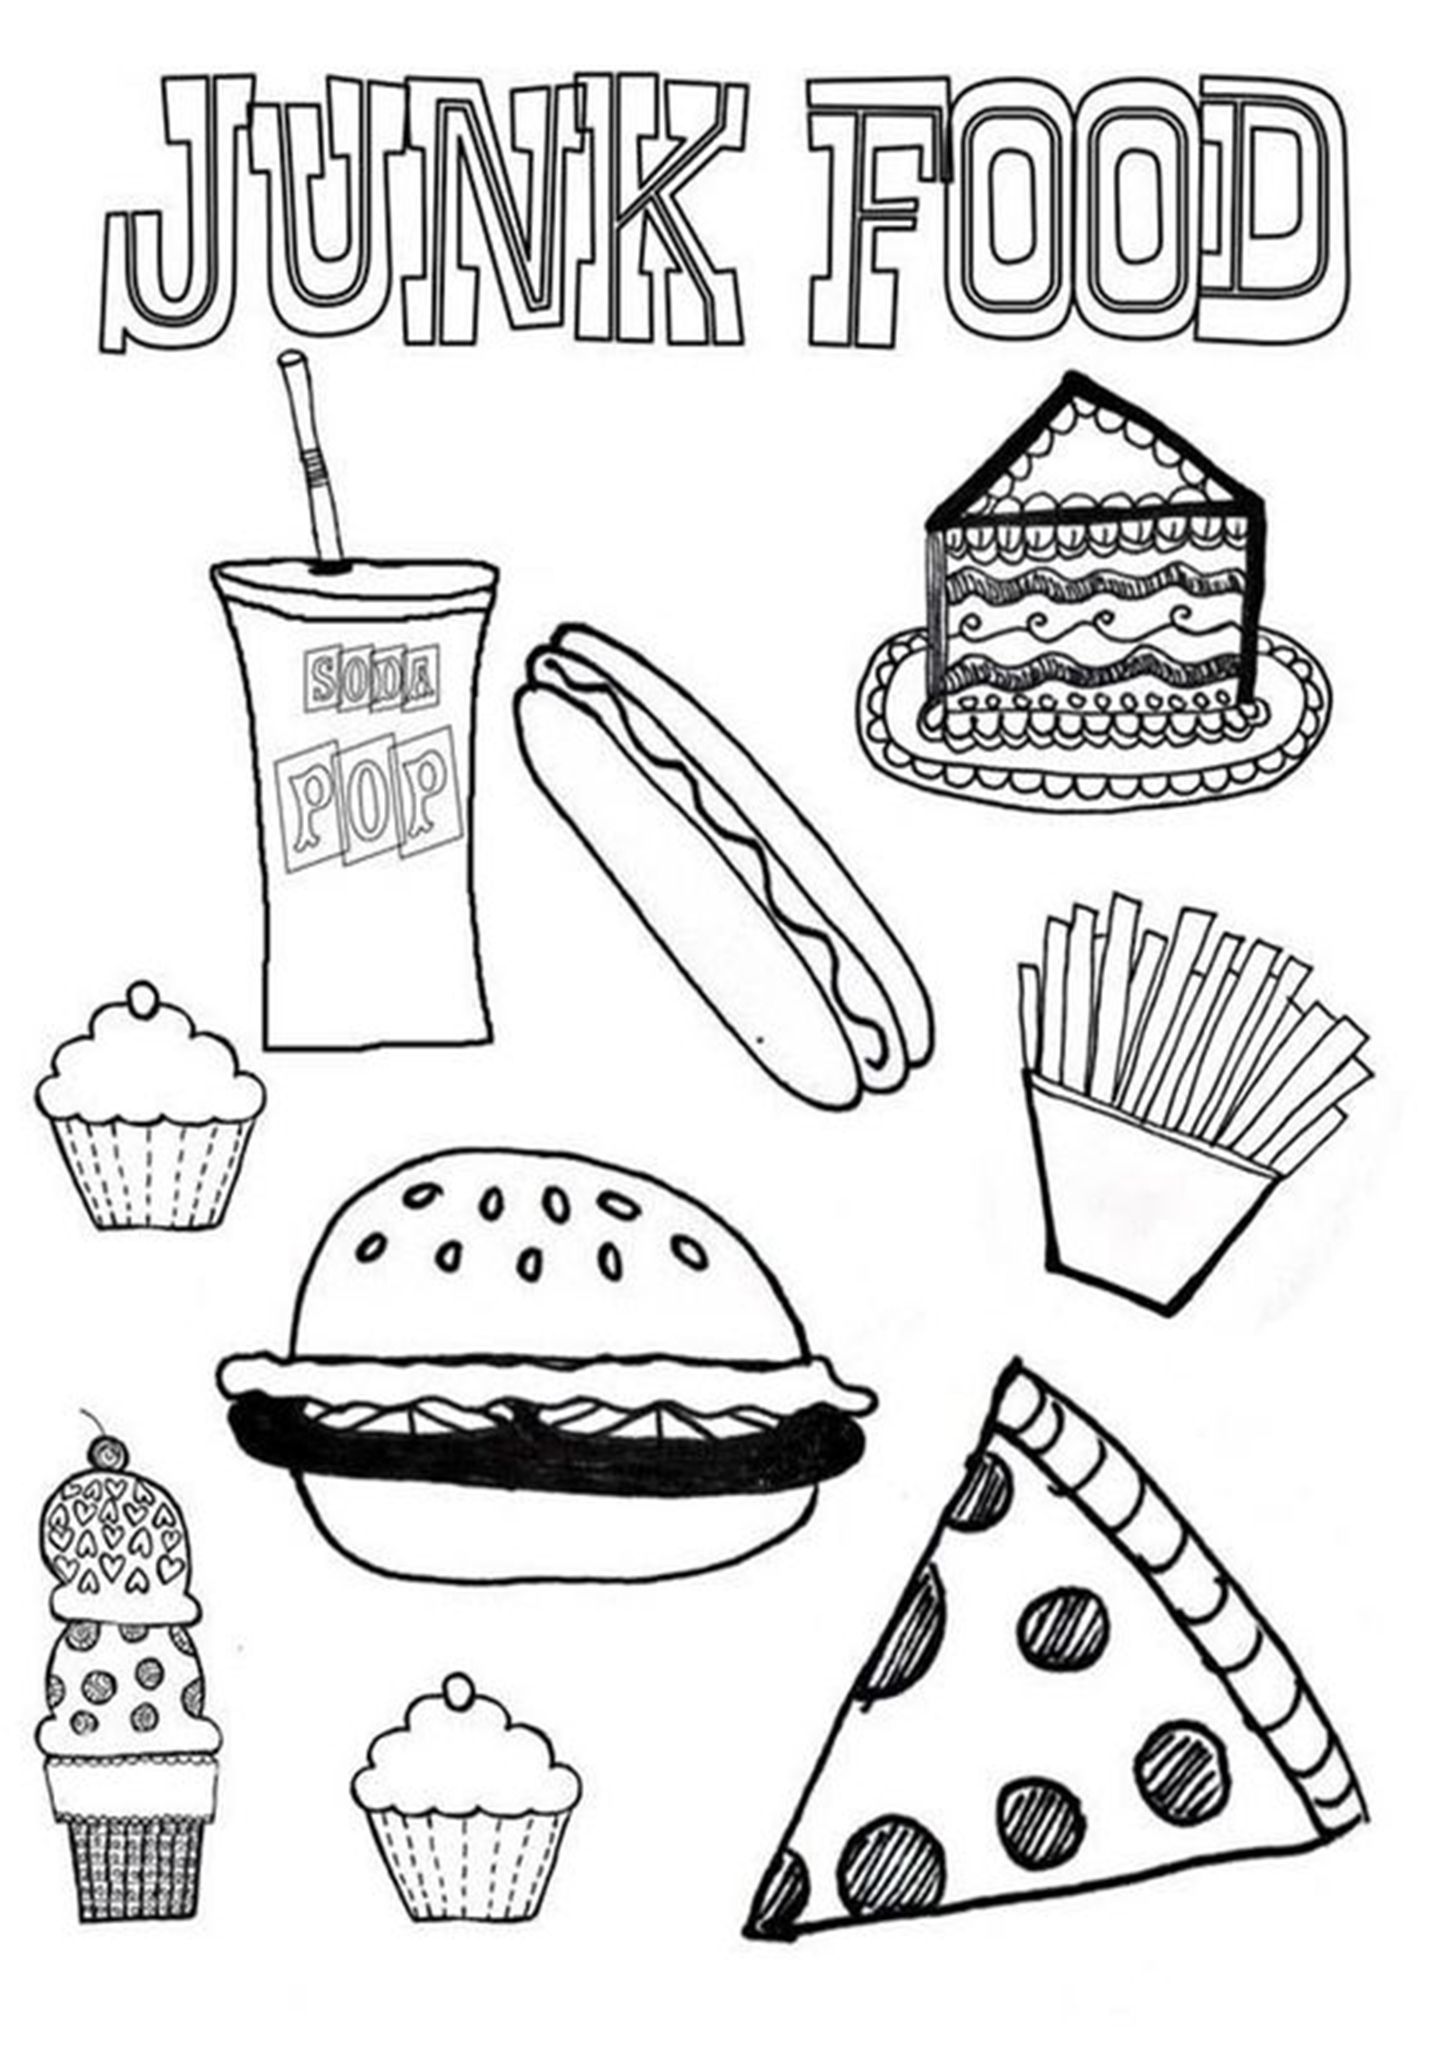 Free easy to print food coloring pages food coloring pages food coloring junk food